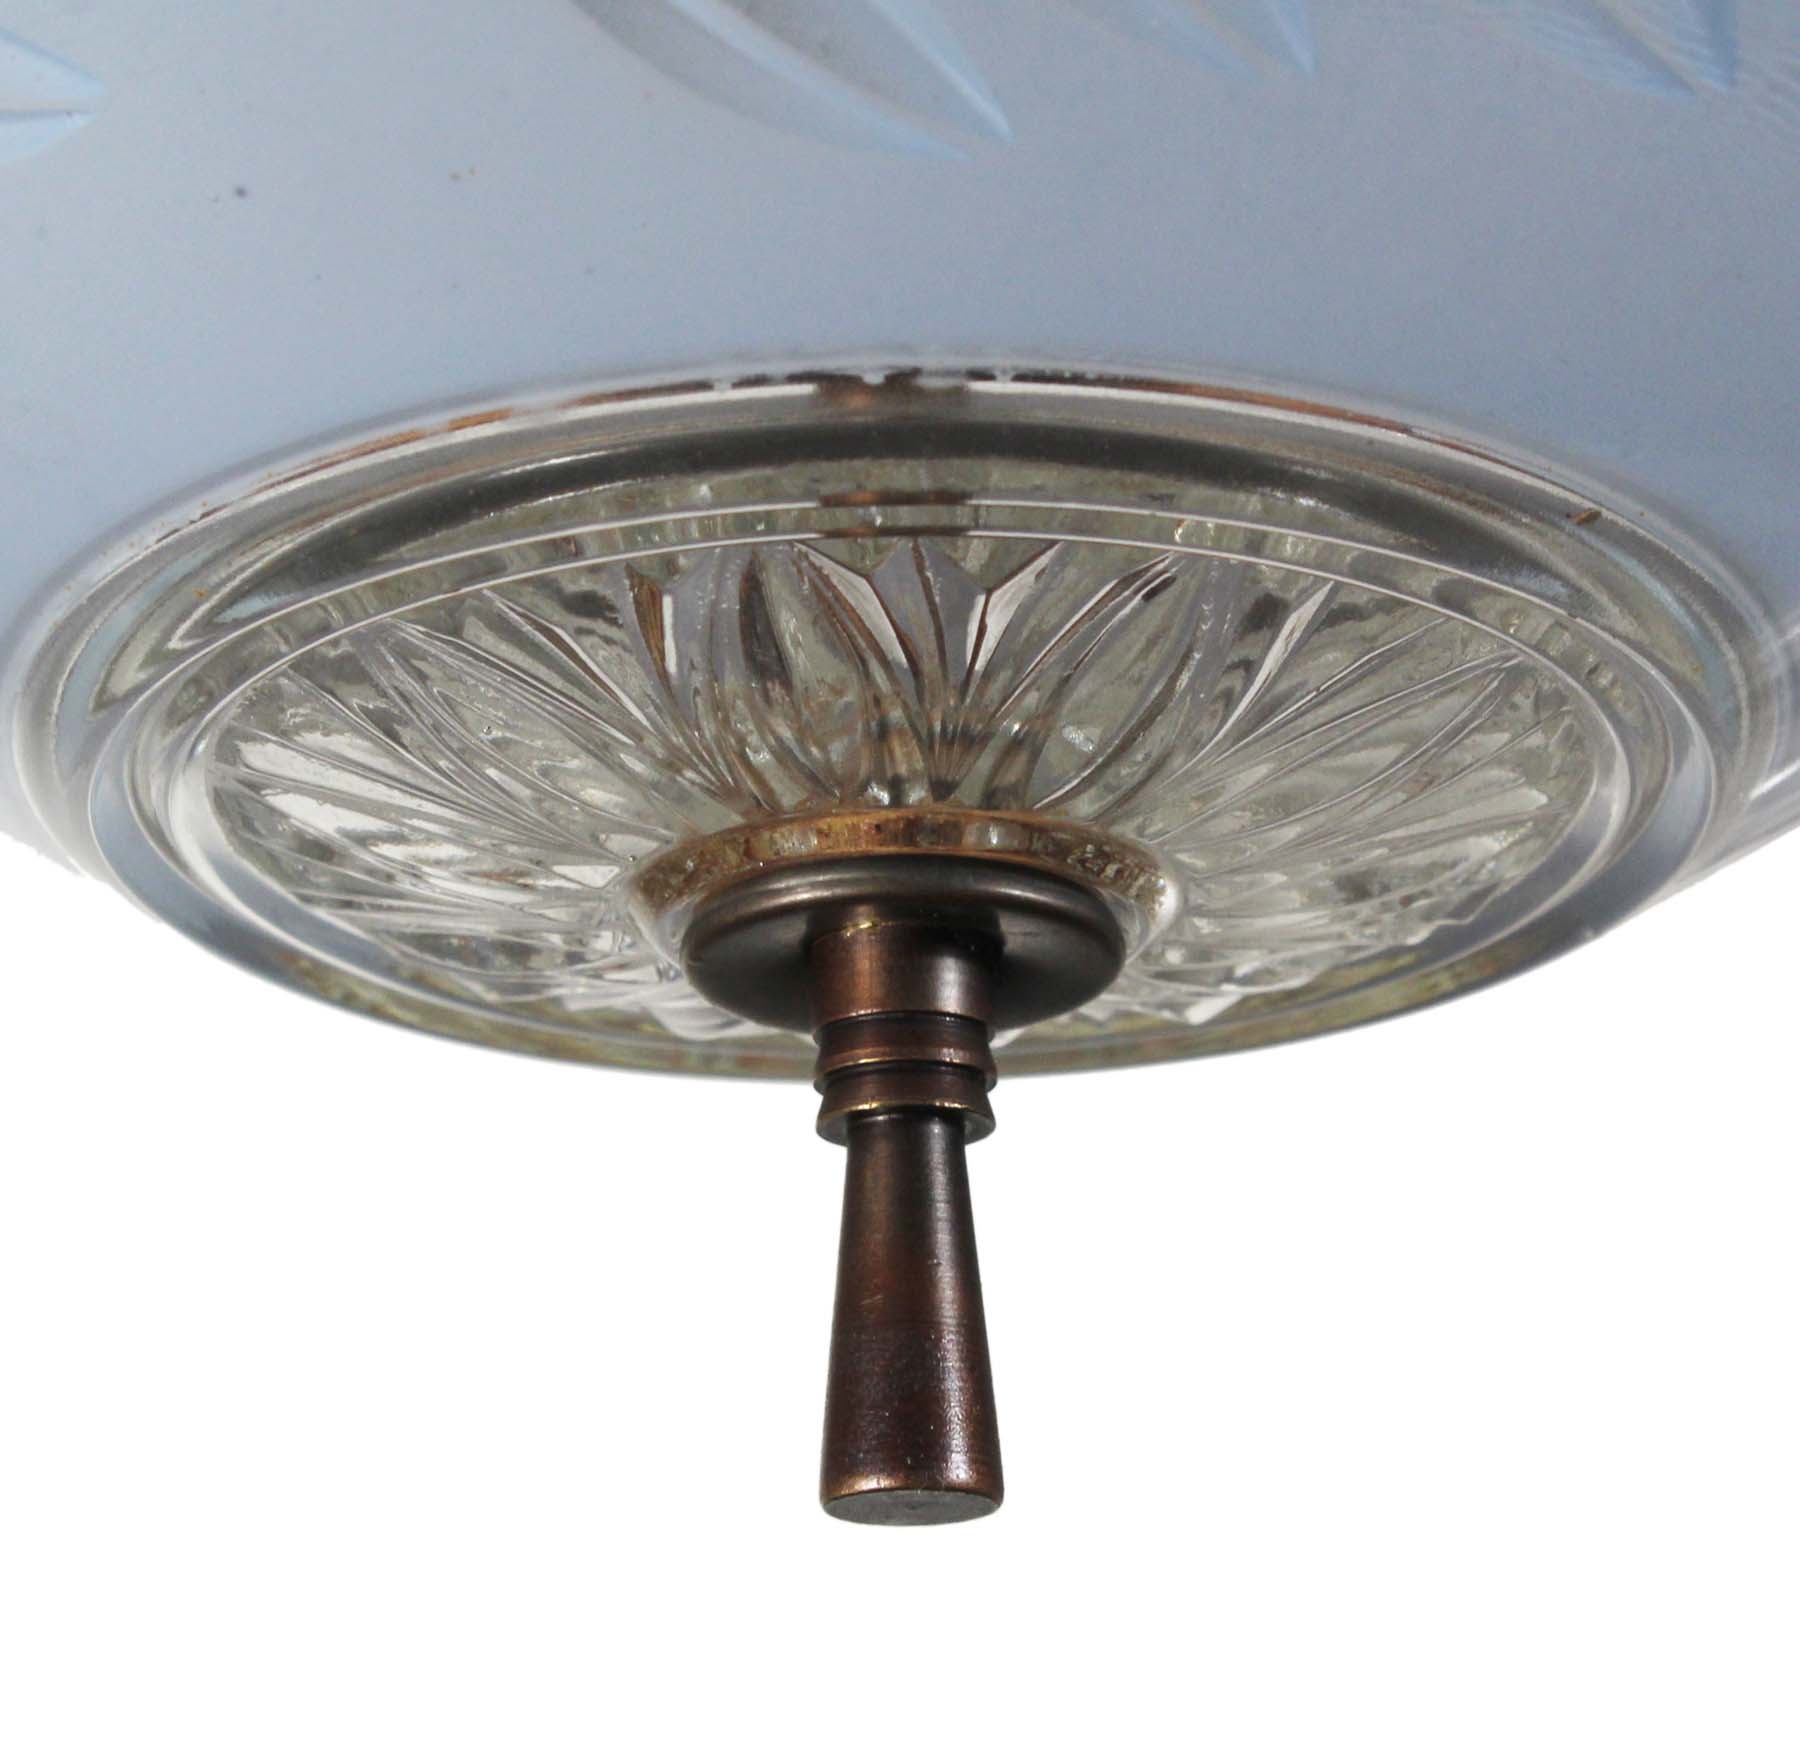 SOLD Vintage Semi-Flush Mount with Original Glass Shade-68851